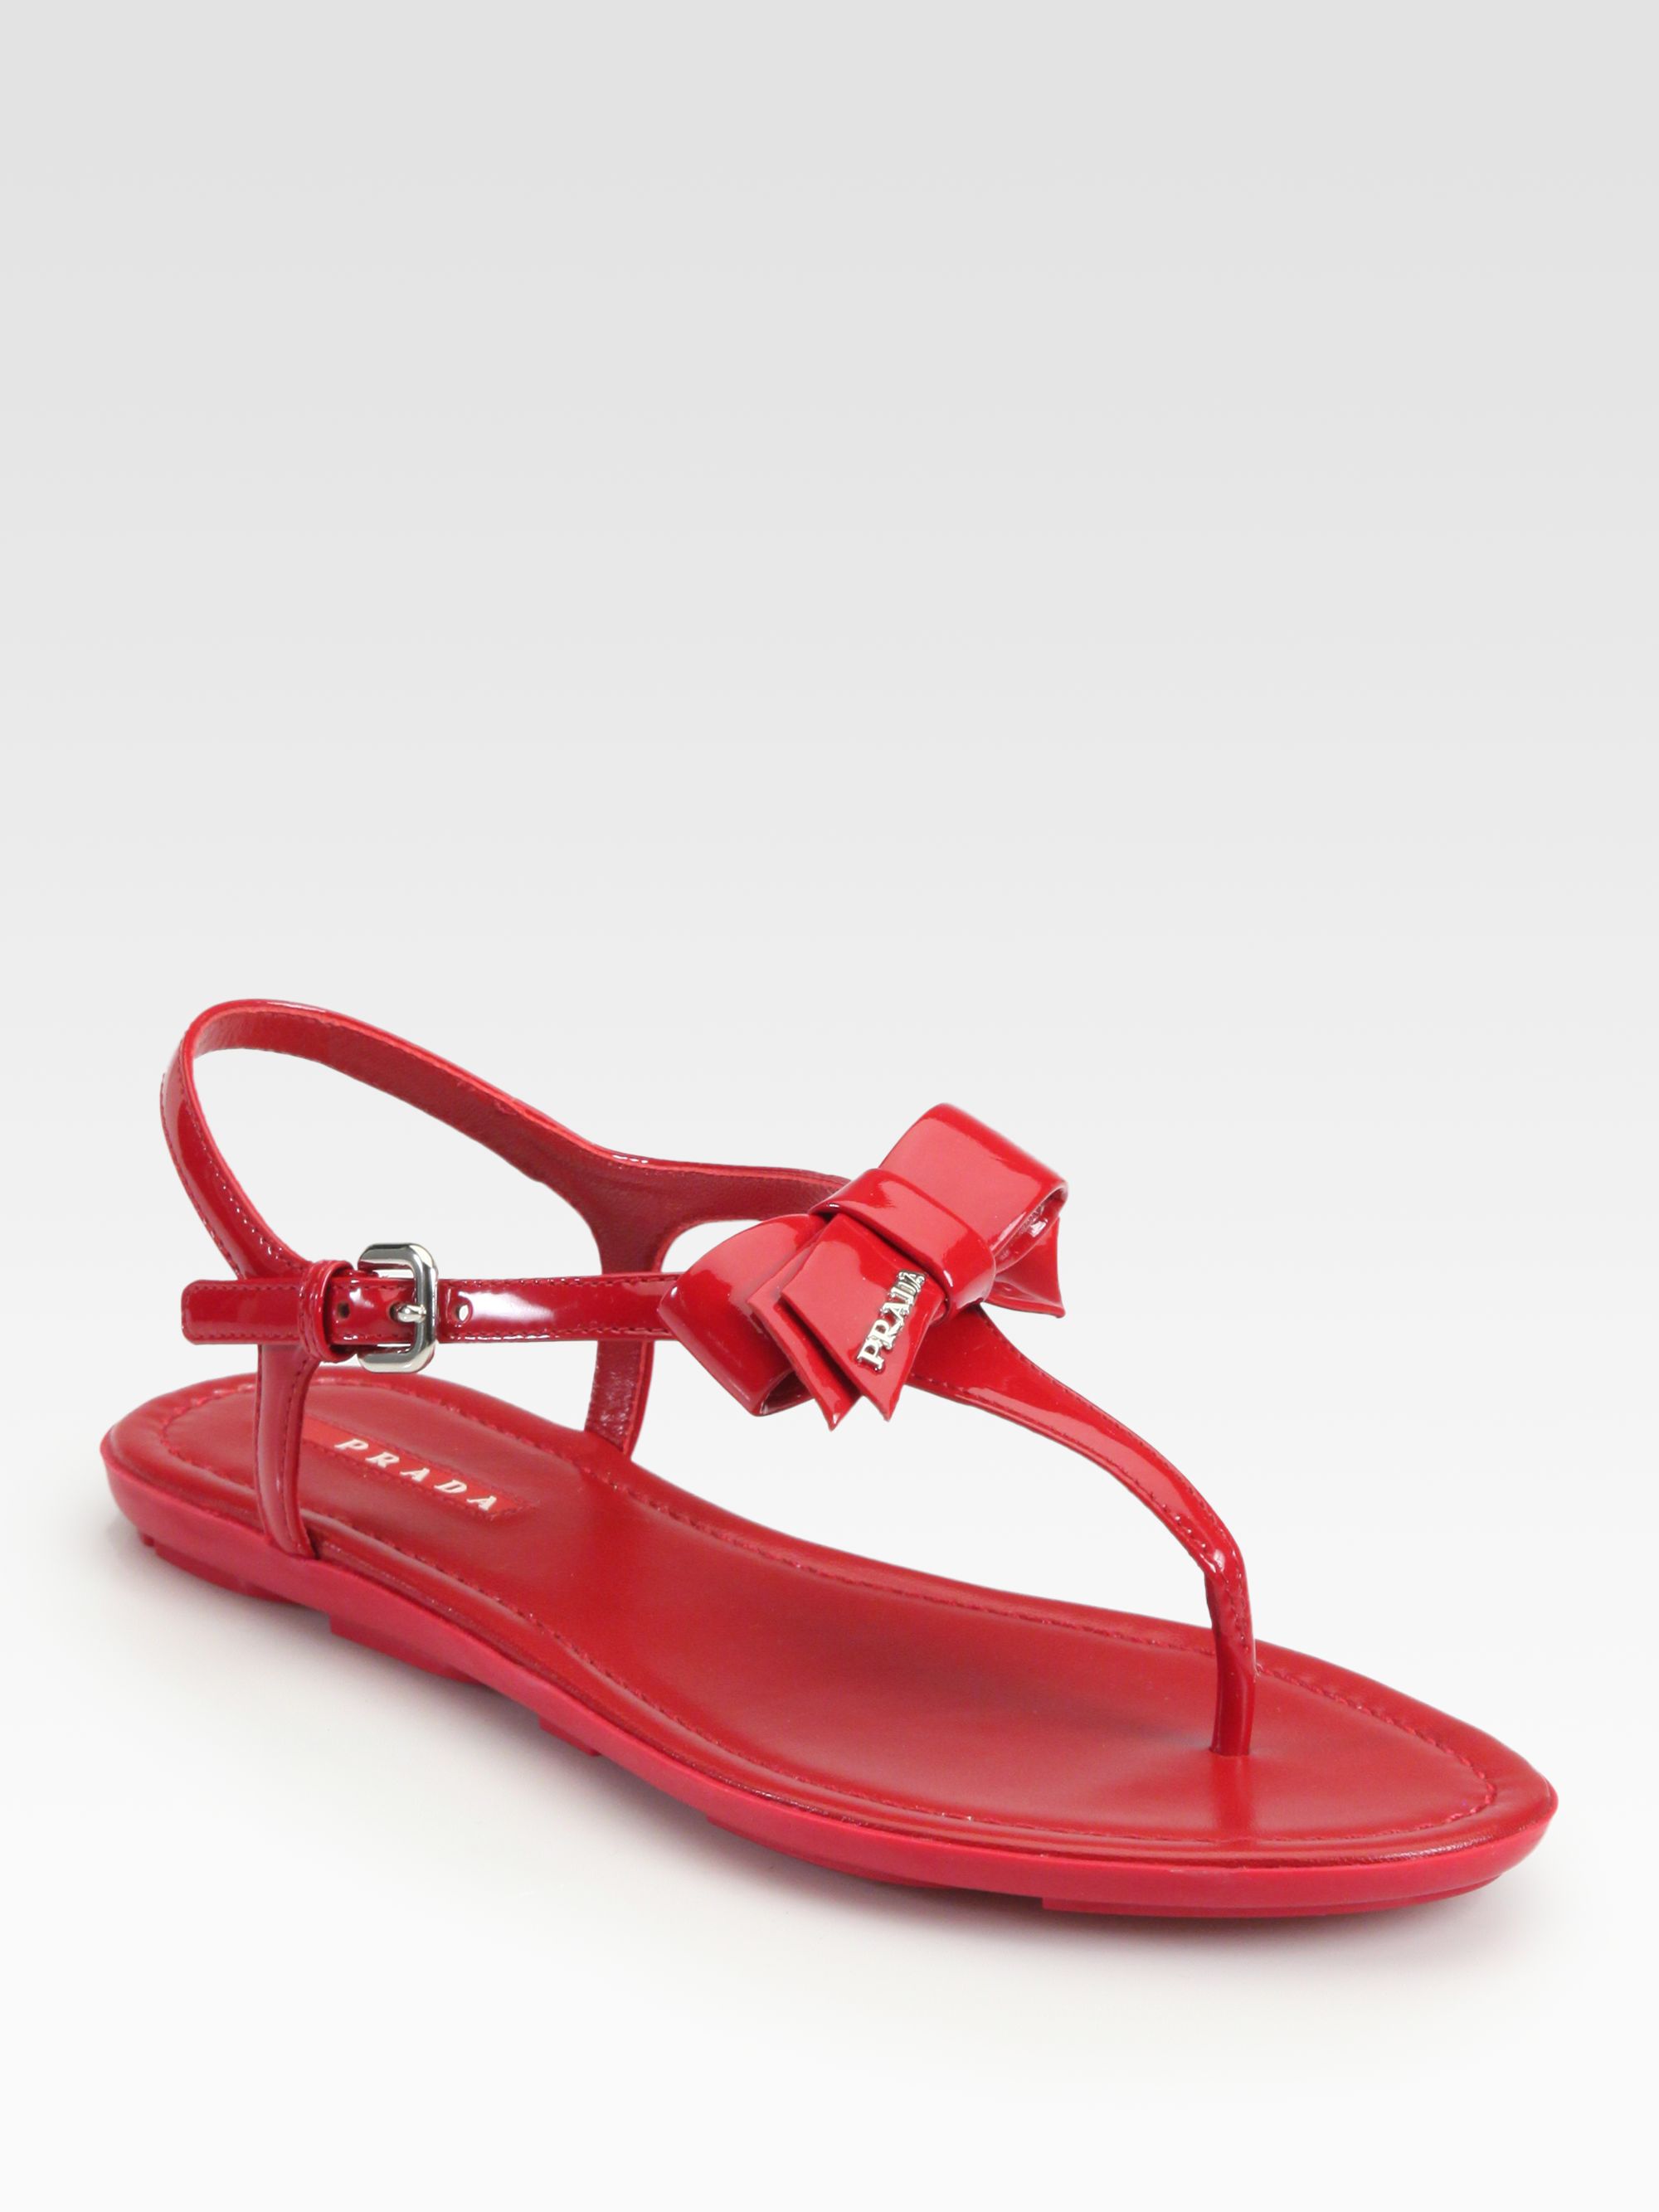 Bows and Sandals: Prada Bow Sandals